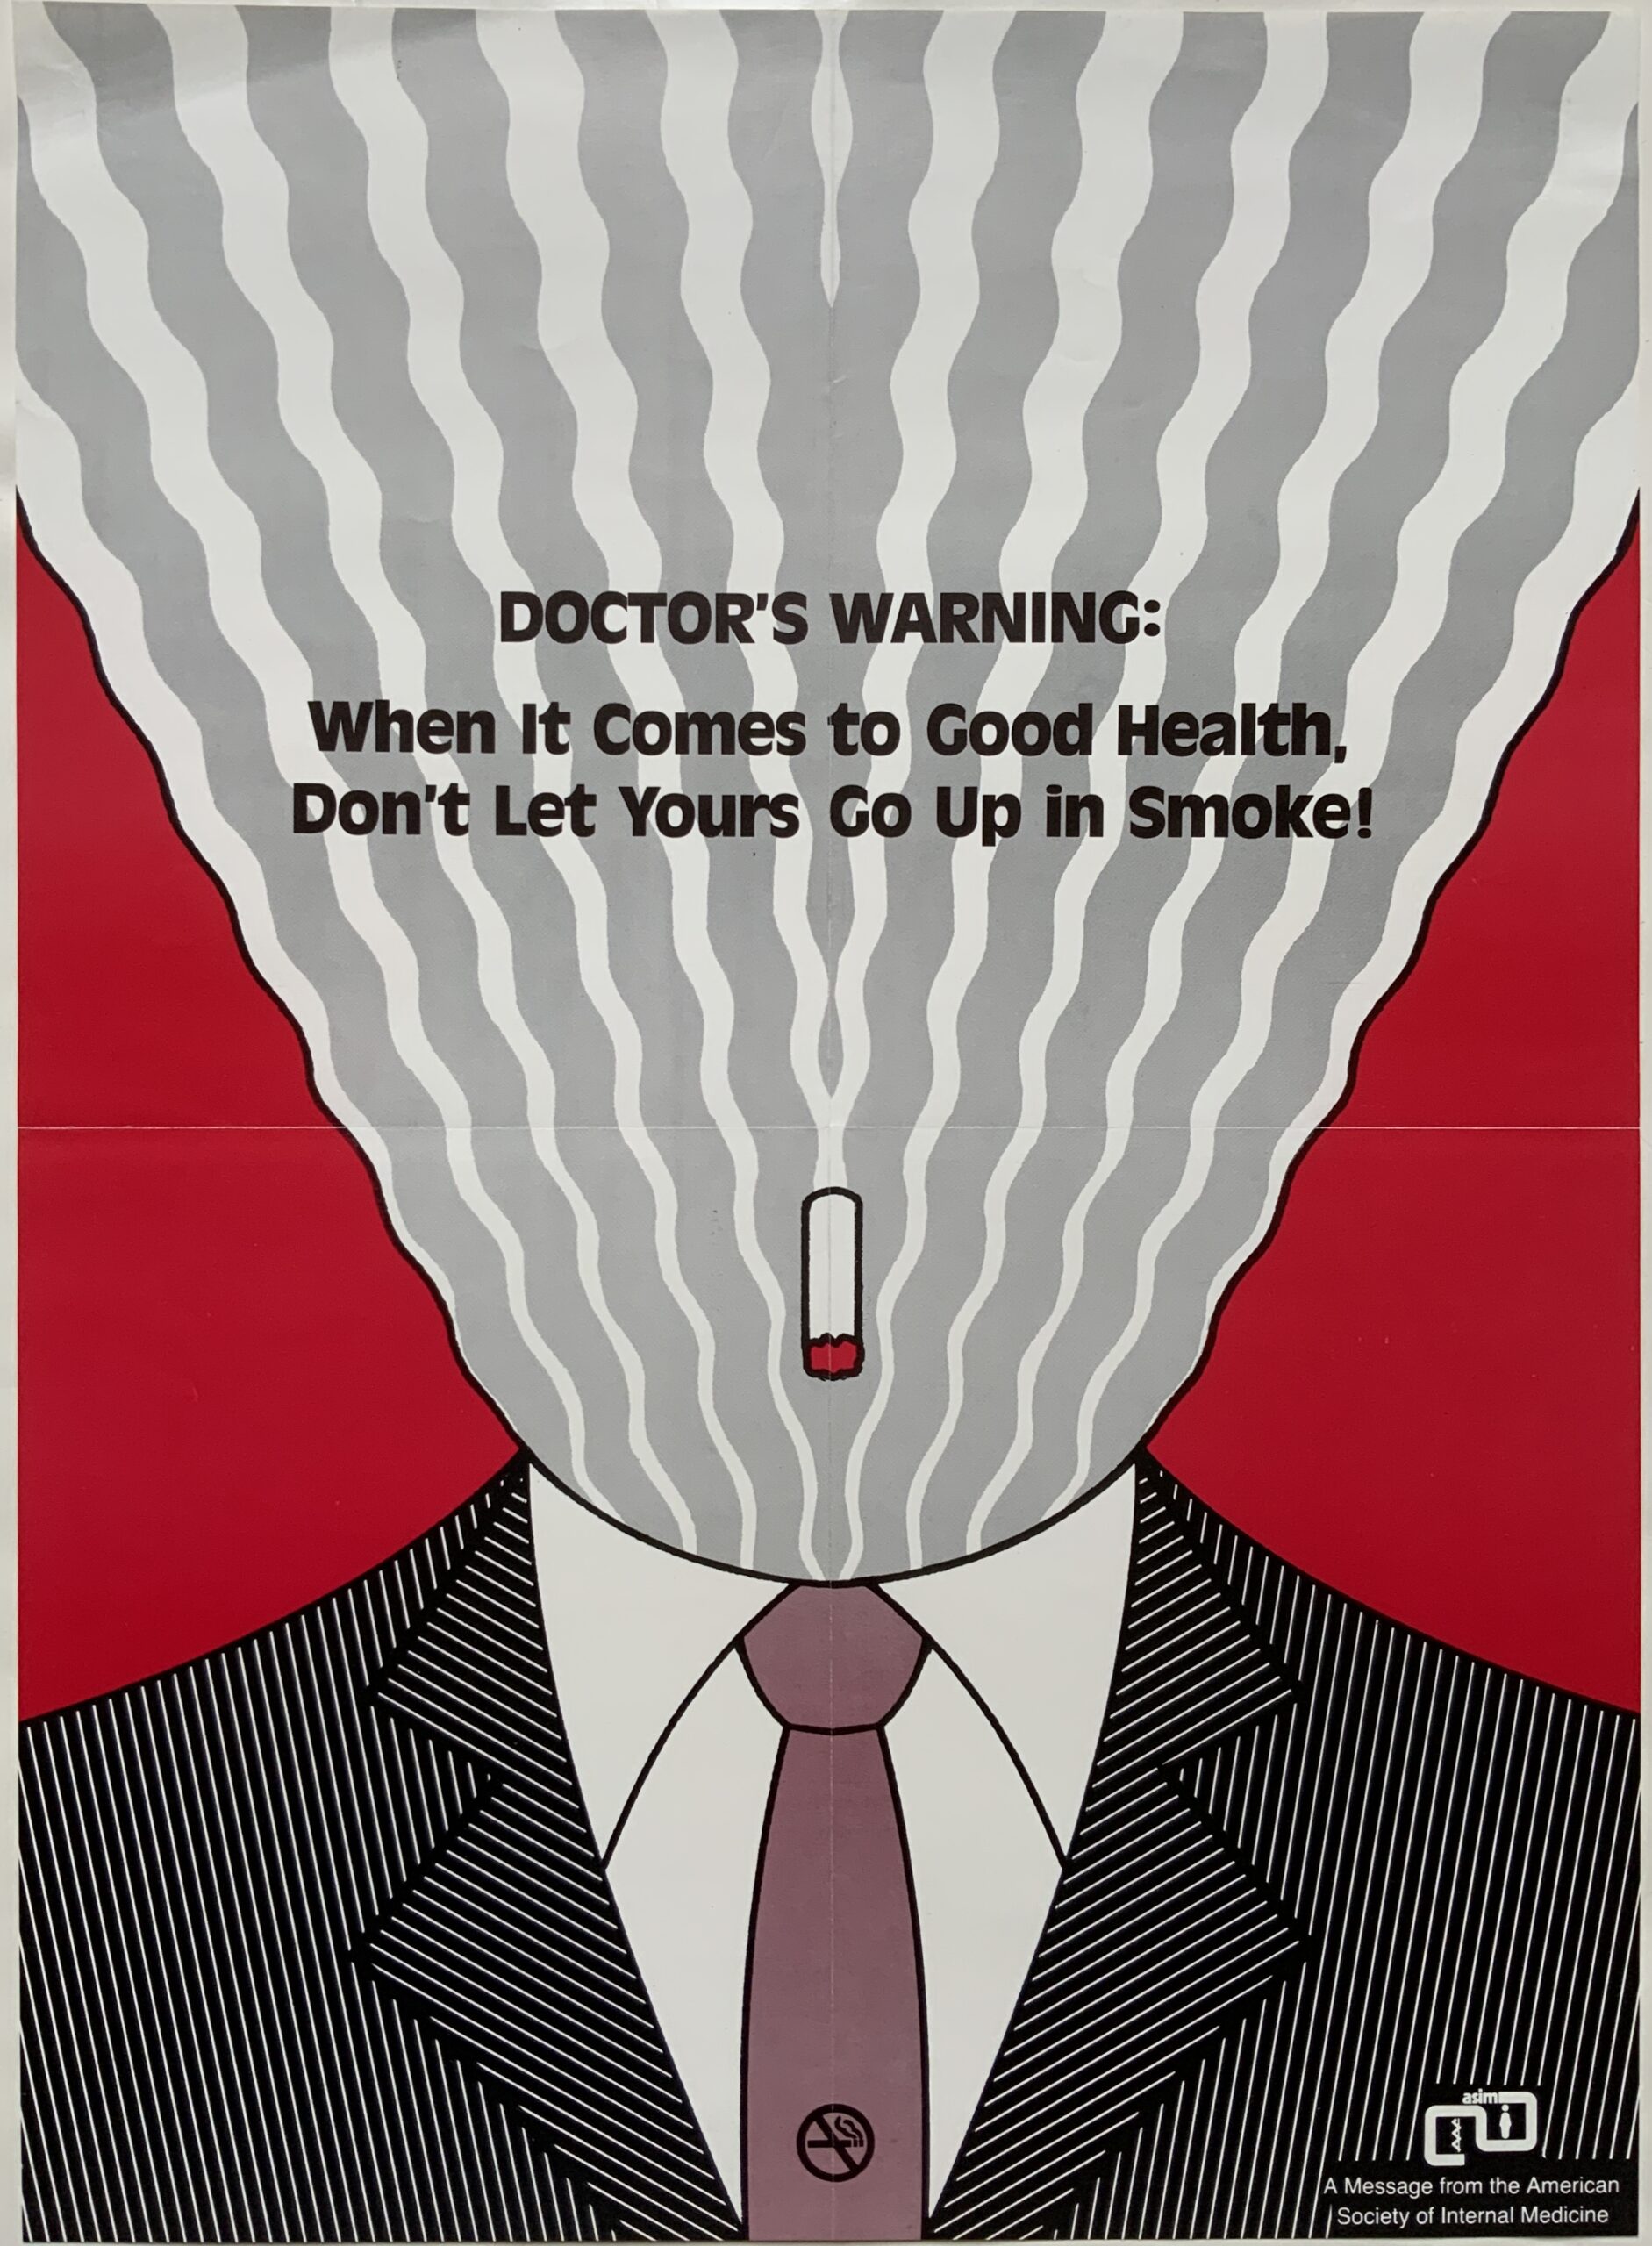 M389	DOCTOR’S WARNING - WHEN IT COMES TO GOOD HEALTH, DON’T LET YOURS GO UP IN SMOKE!